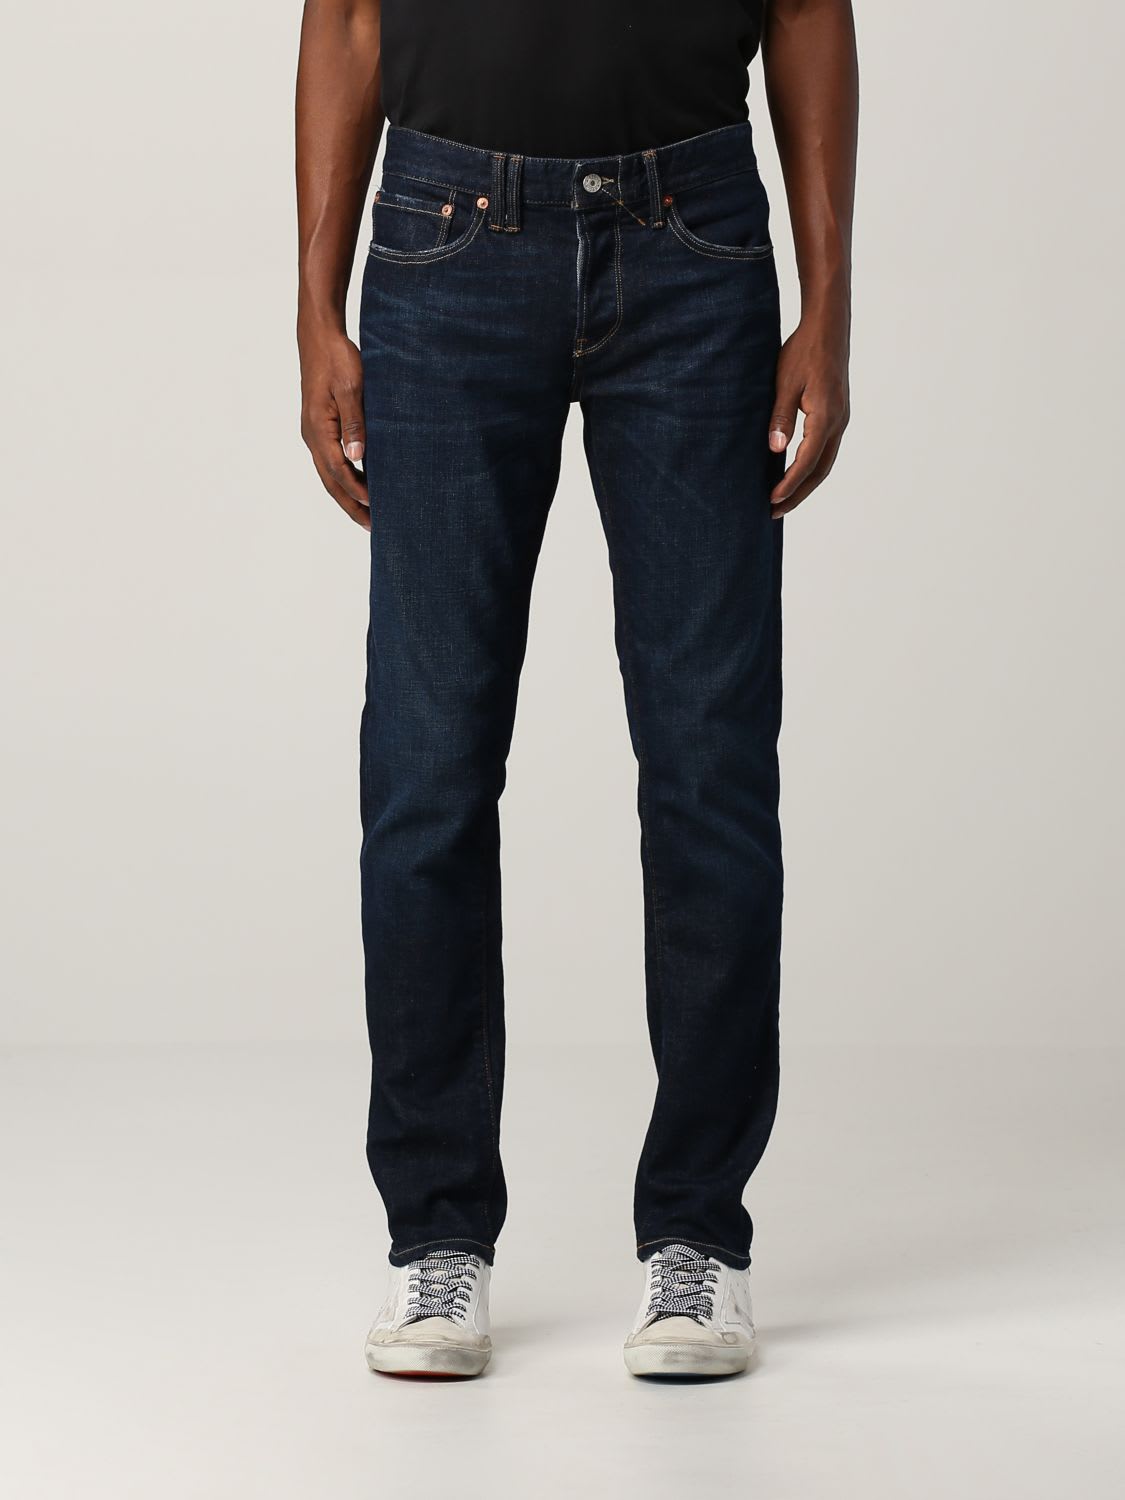 Cycle Jeans Jeans Men Cycle